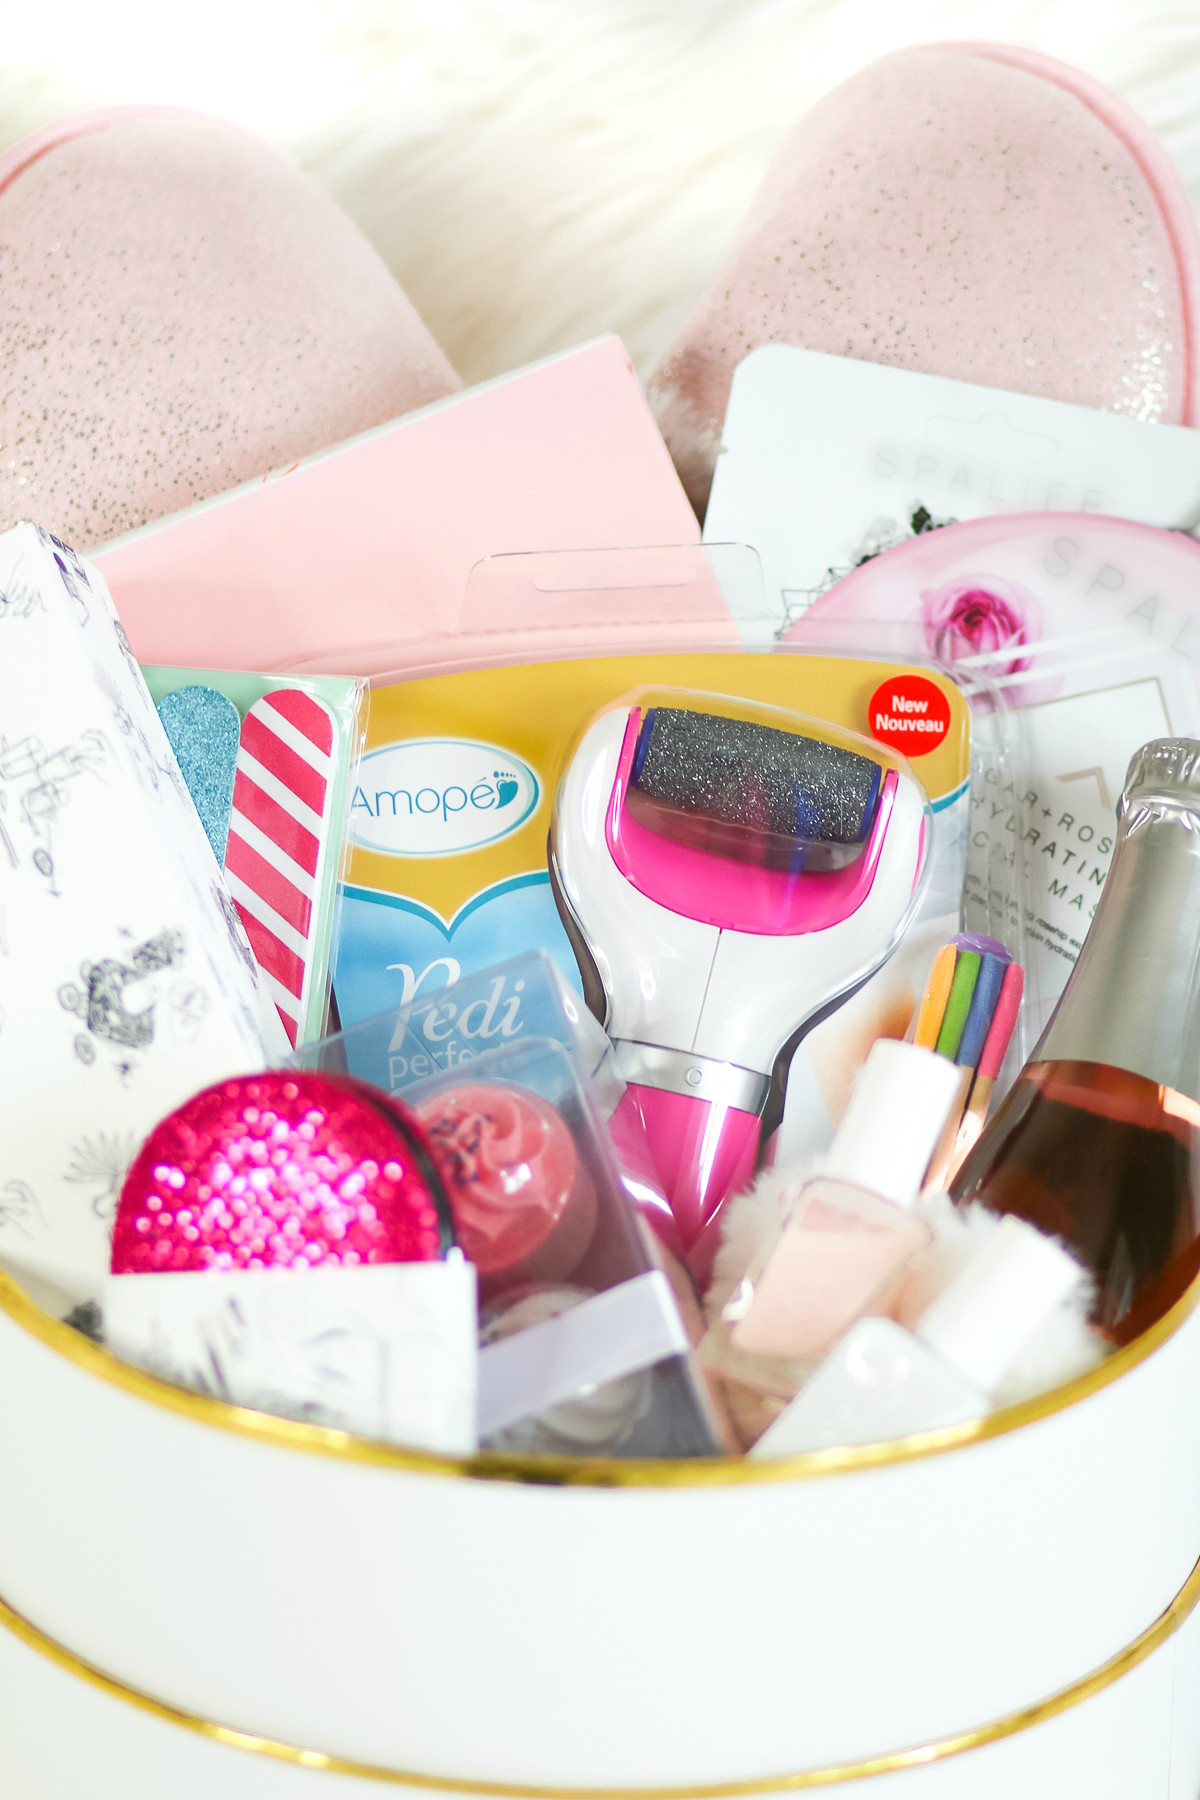 Self Care Gift Basket Ideas
 DIY Self Care Gift Basket A Collection of 12 Awesome Self